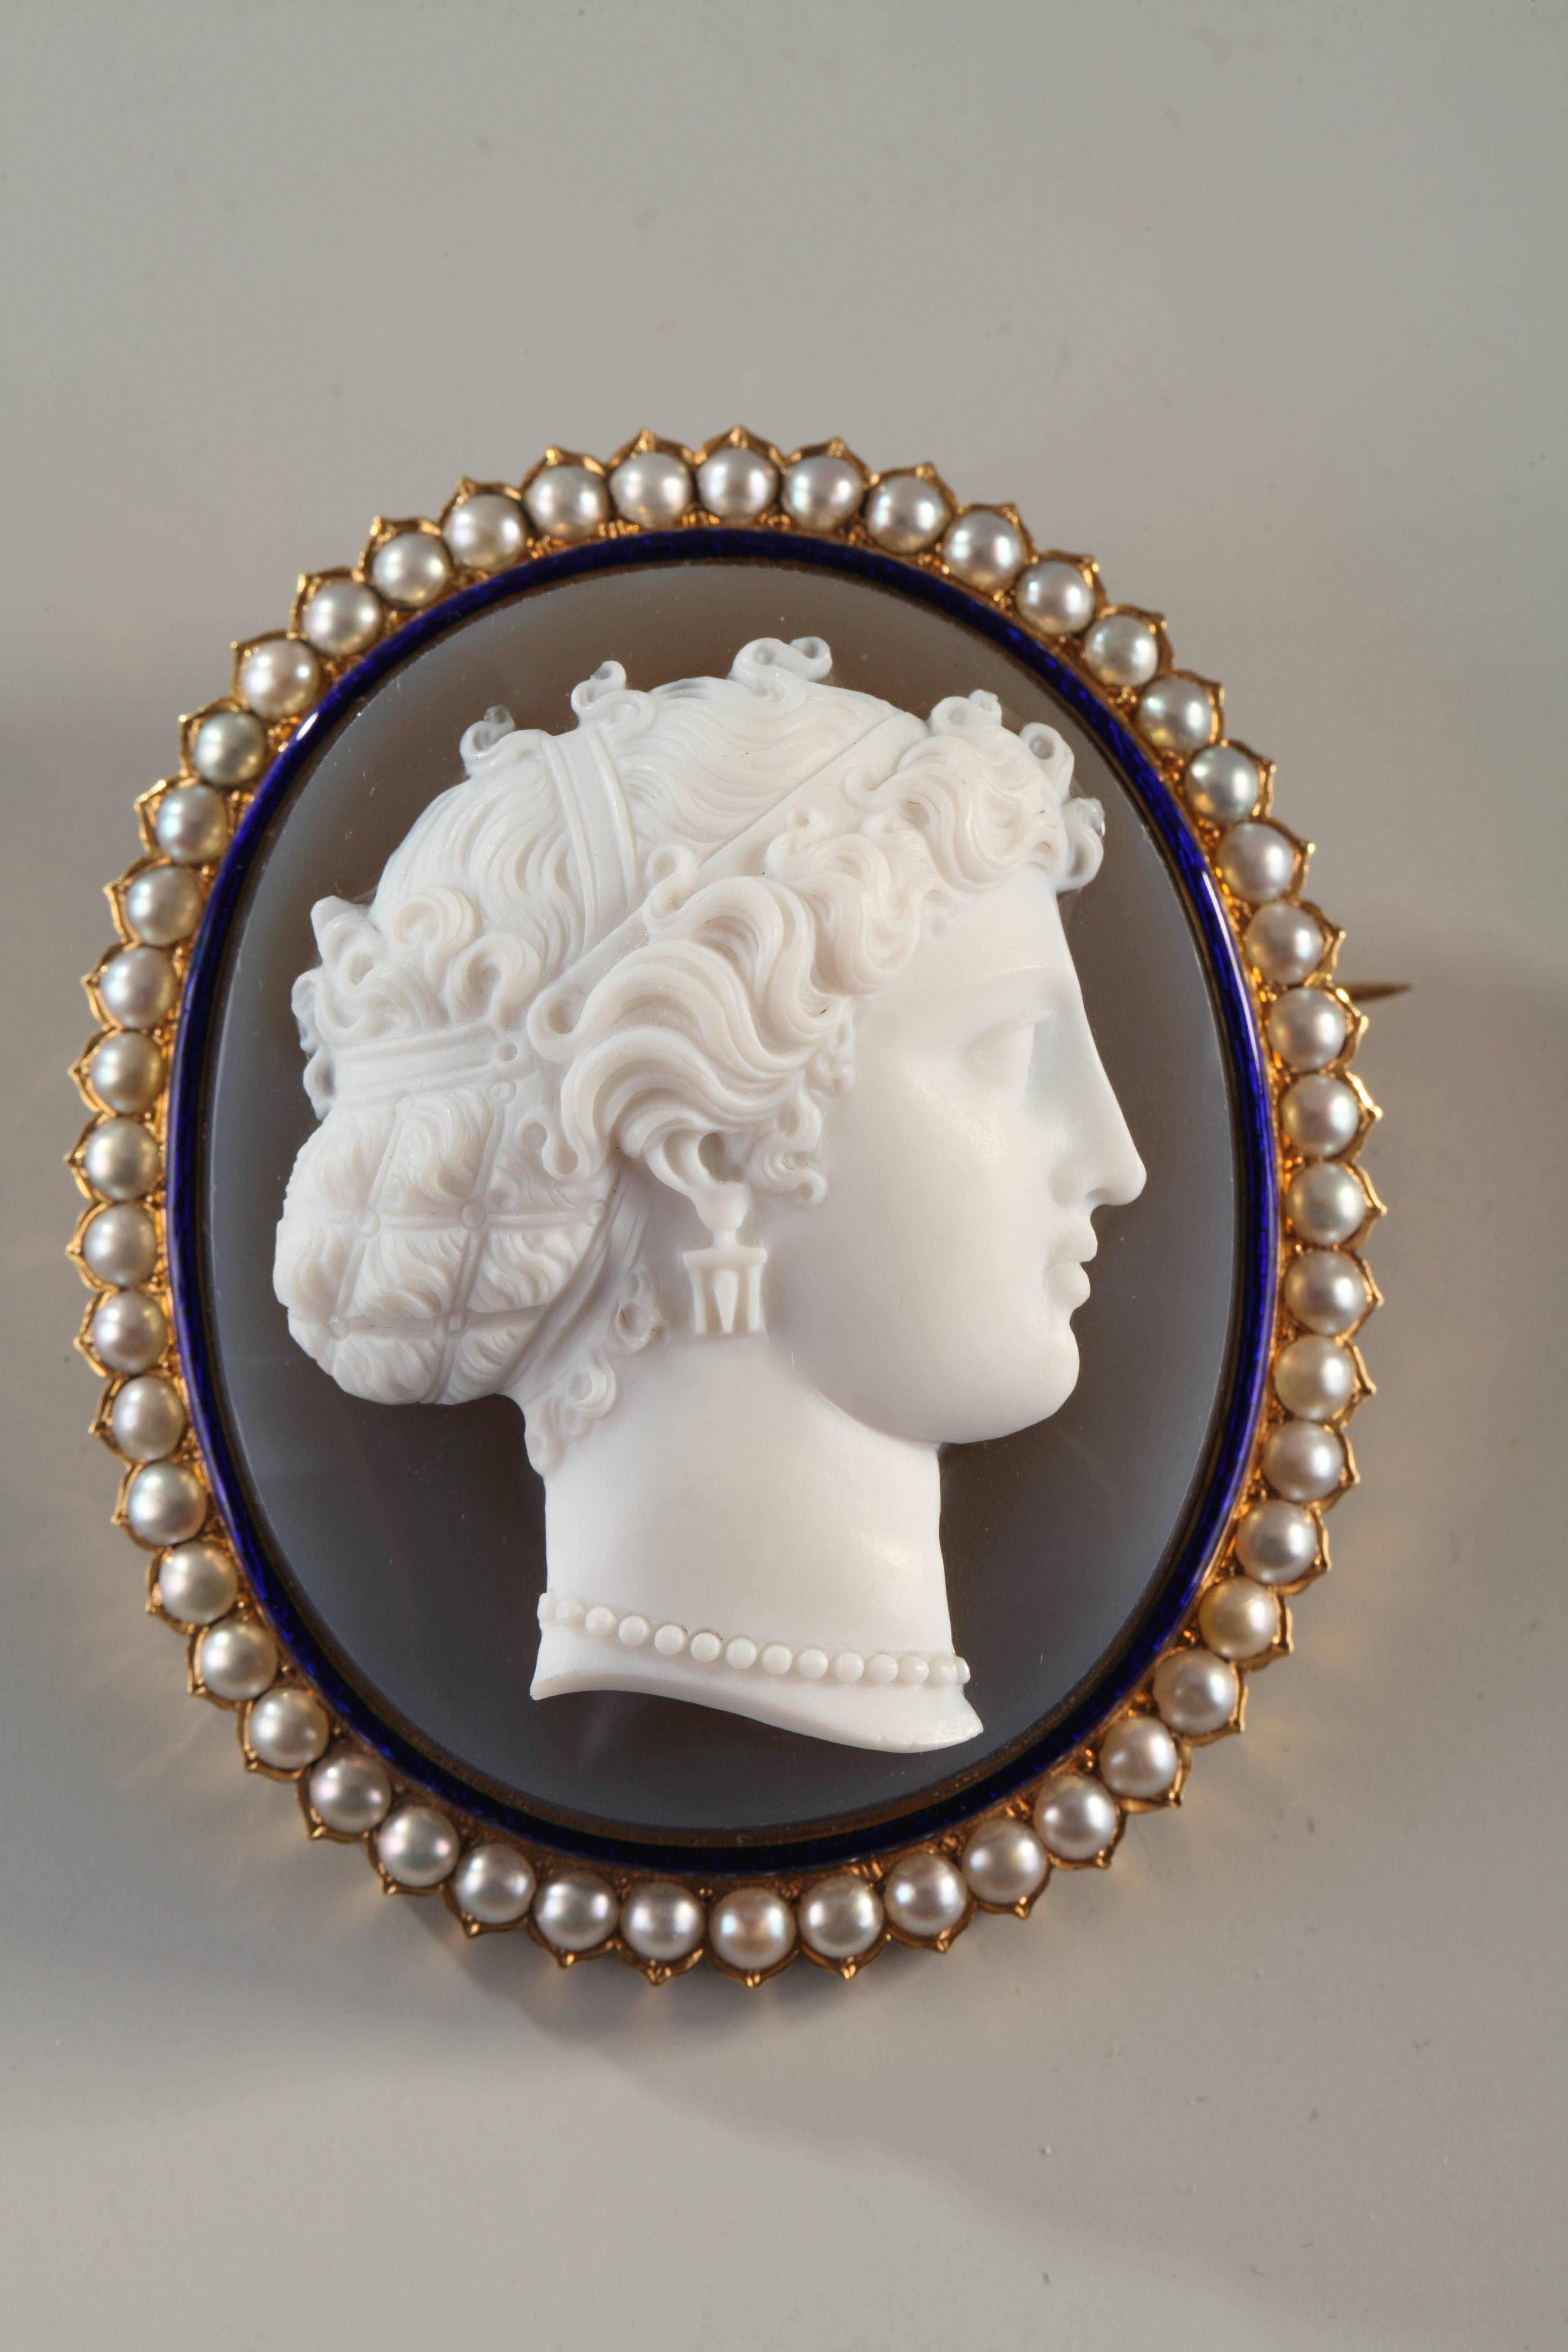 Large and exceptional cameo in two com or agate, circled with blue enamel and natural pearls. Mounted as a brooch in yellow  gold.
Admire the delicacy of execution and the beauty of the profile.
In its original box.
